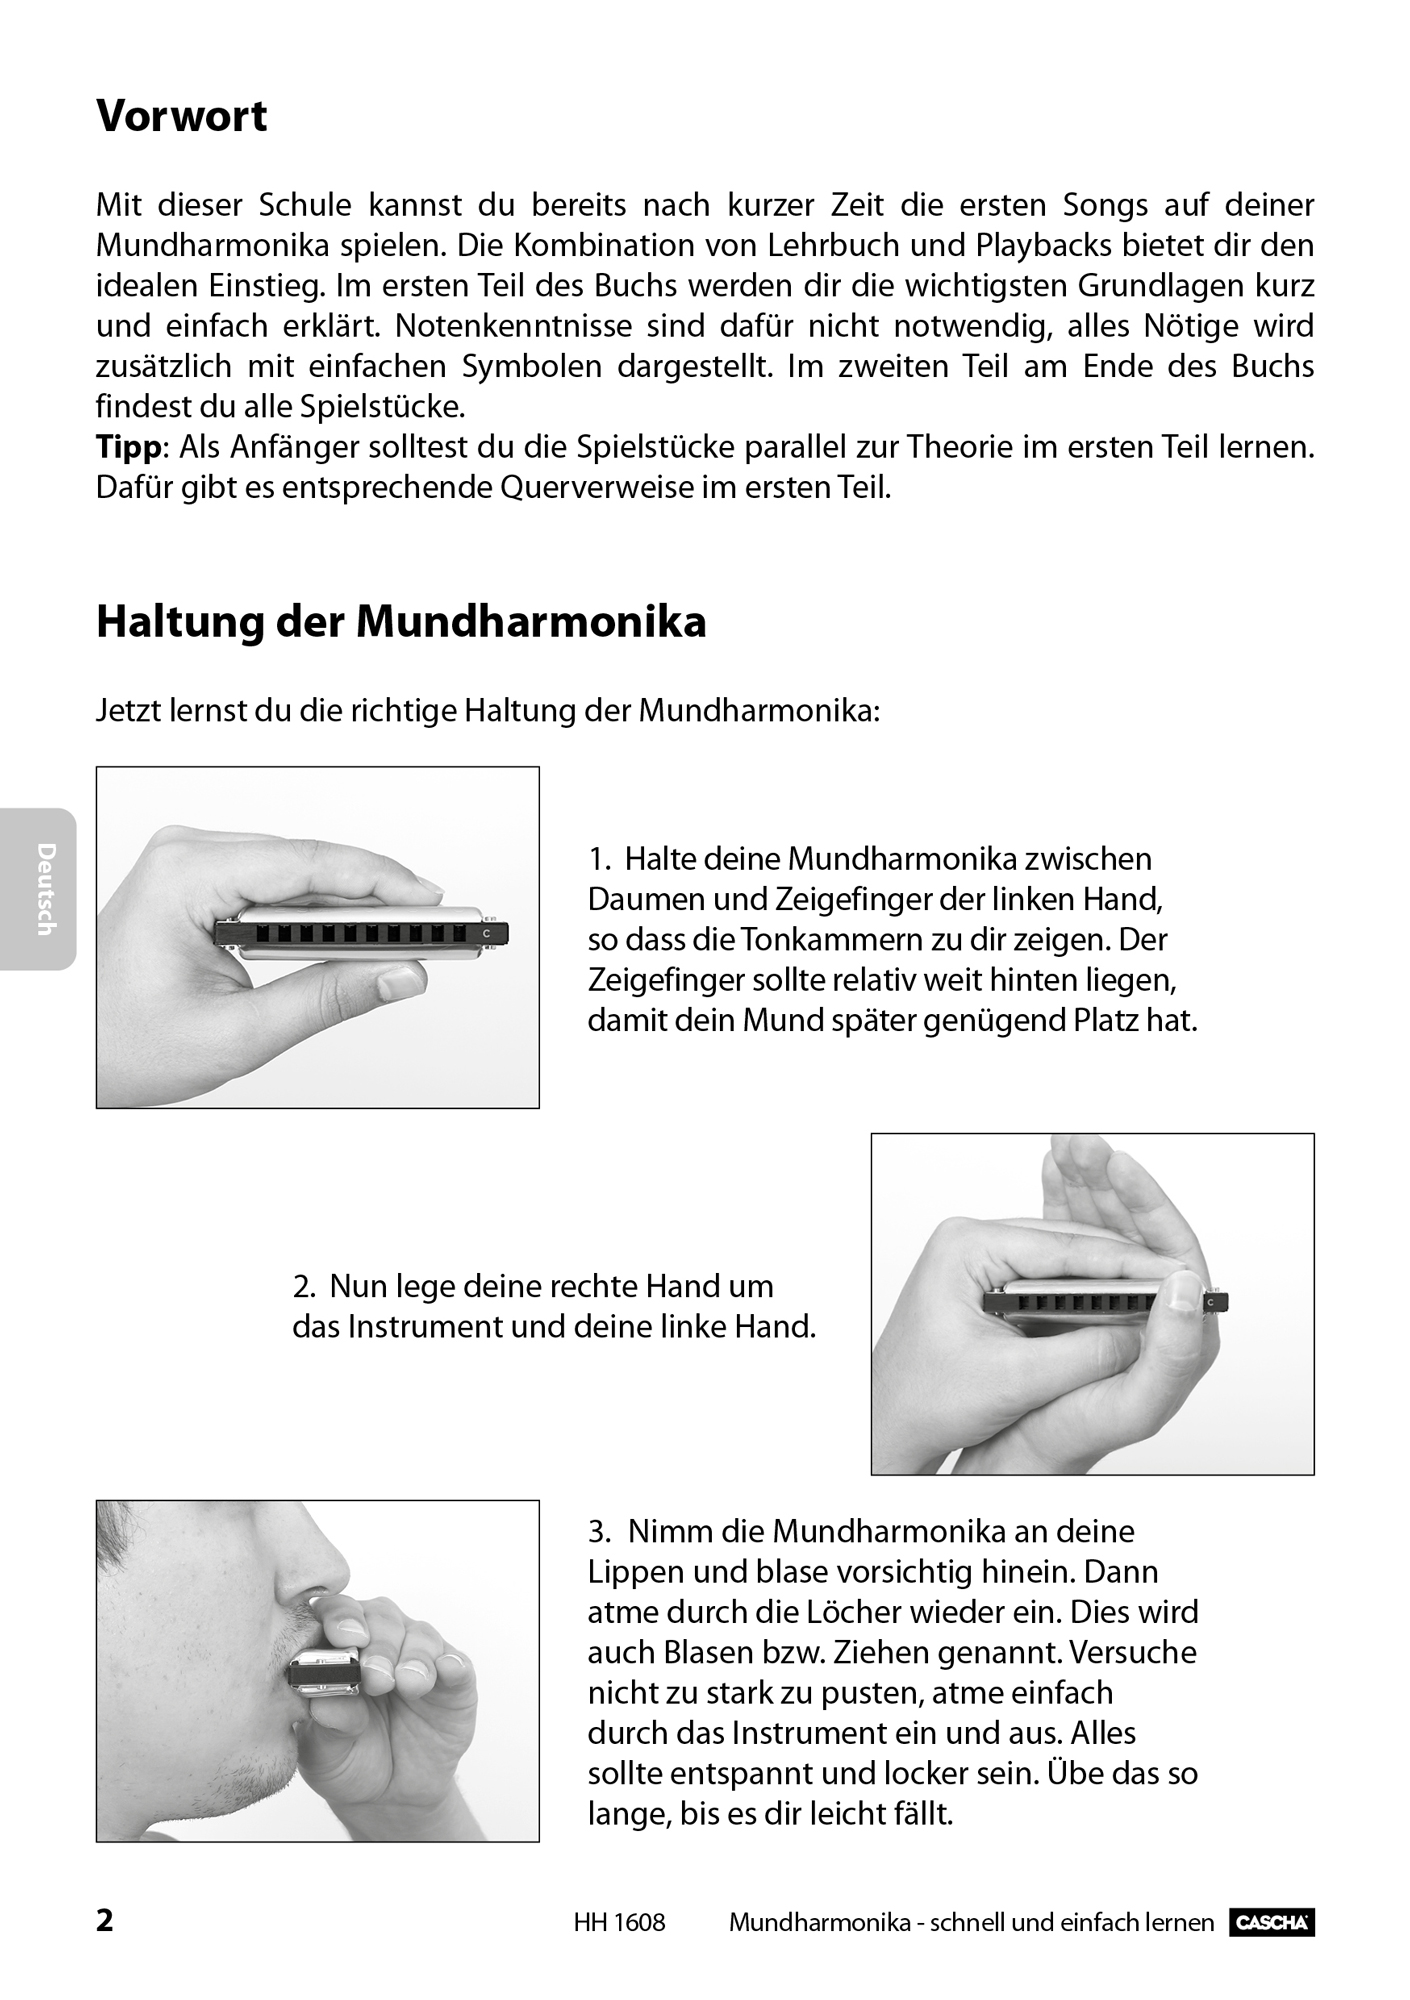 Harmonica - Learn to play quick and easy, 4 languages Product Photos 3